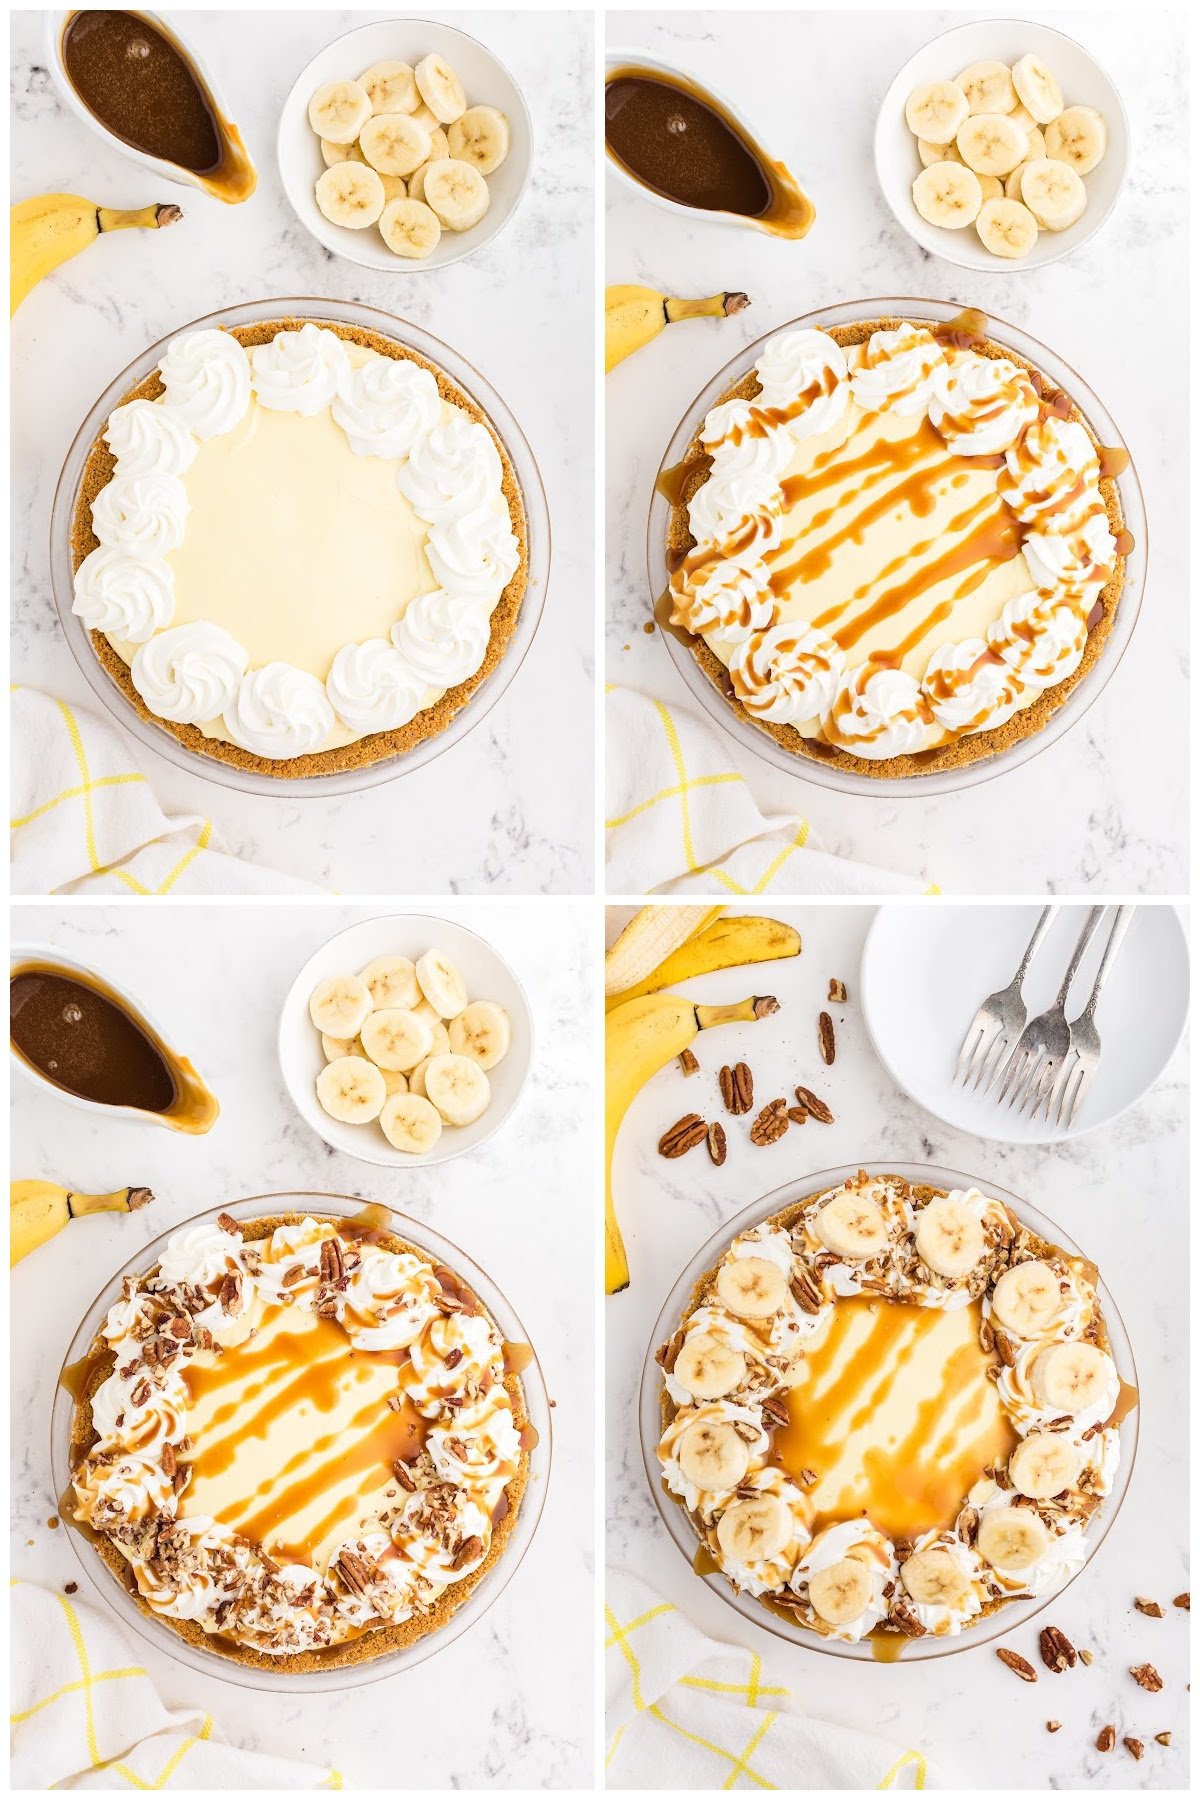 Decorating the banana cream pie with whipped cream, caramel drizzle, sliced bananas, and chopped pecans.